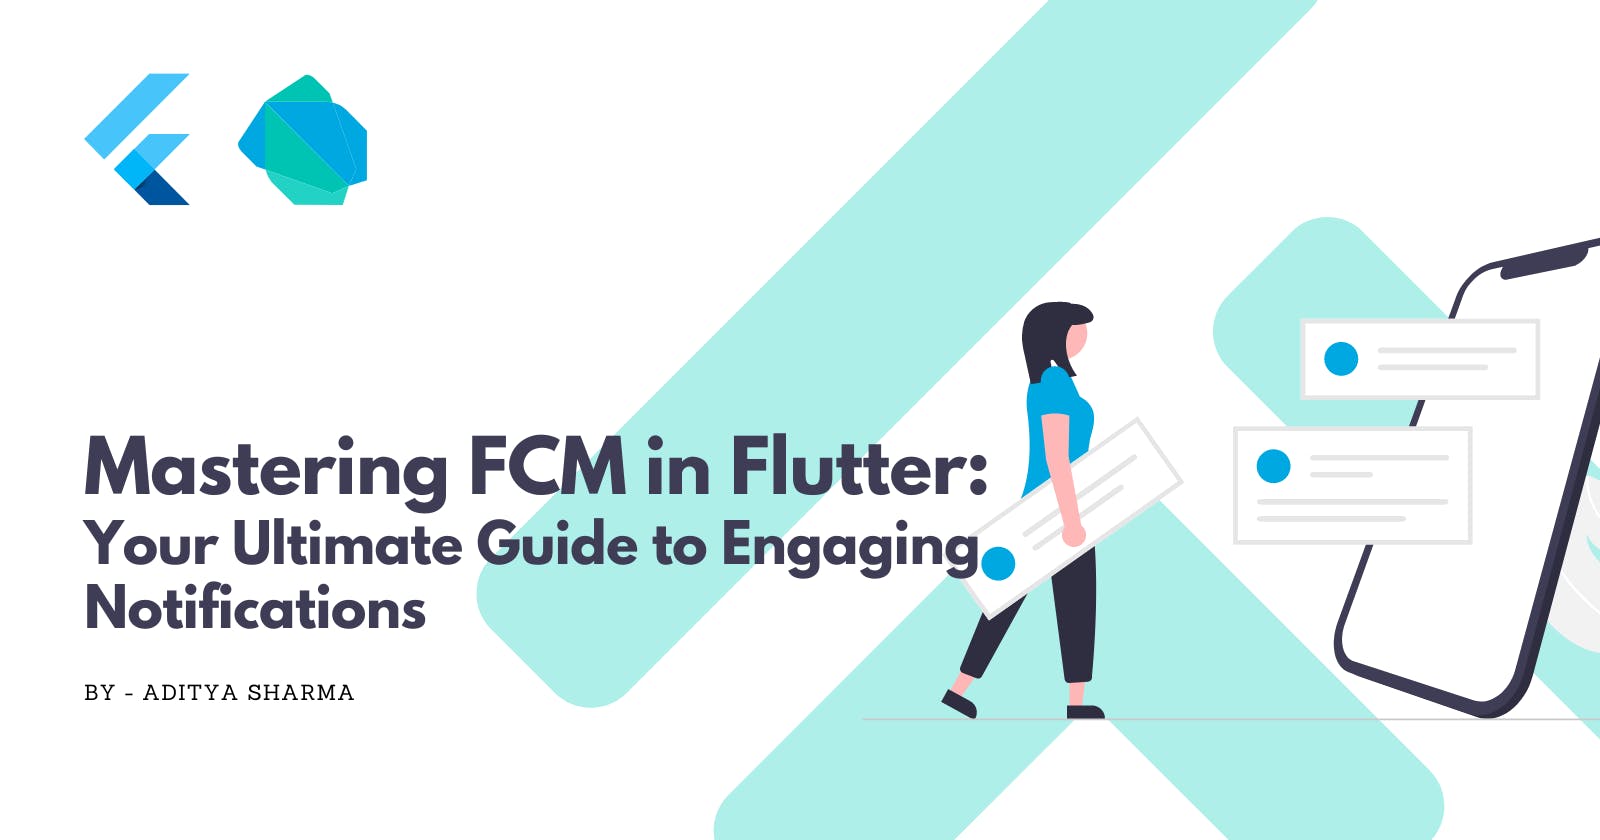 Mastering FCM in Flutter: Your Ultimate Guide to Engaging Notifications